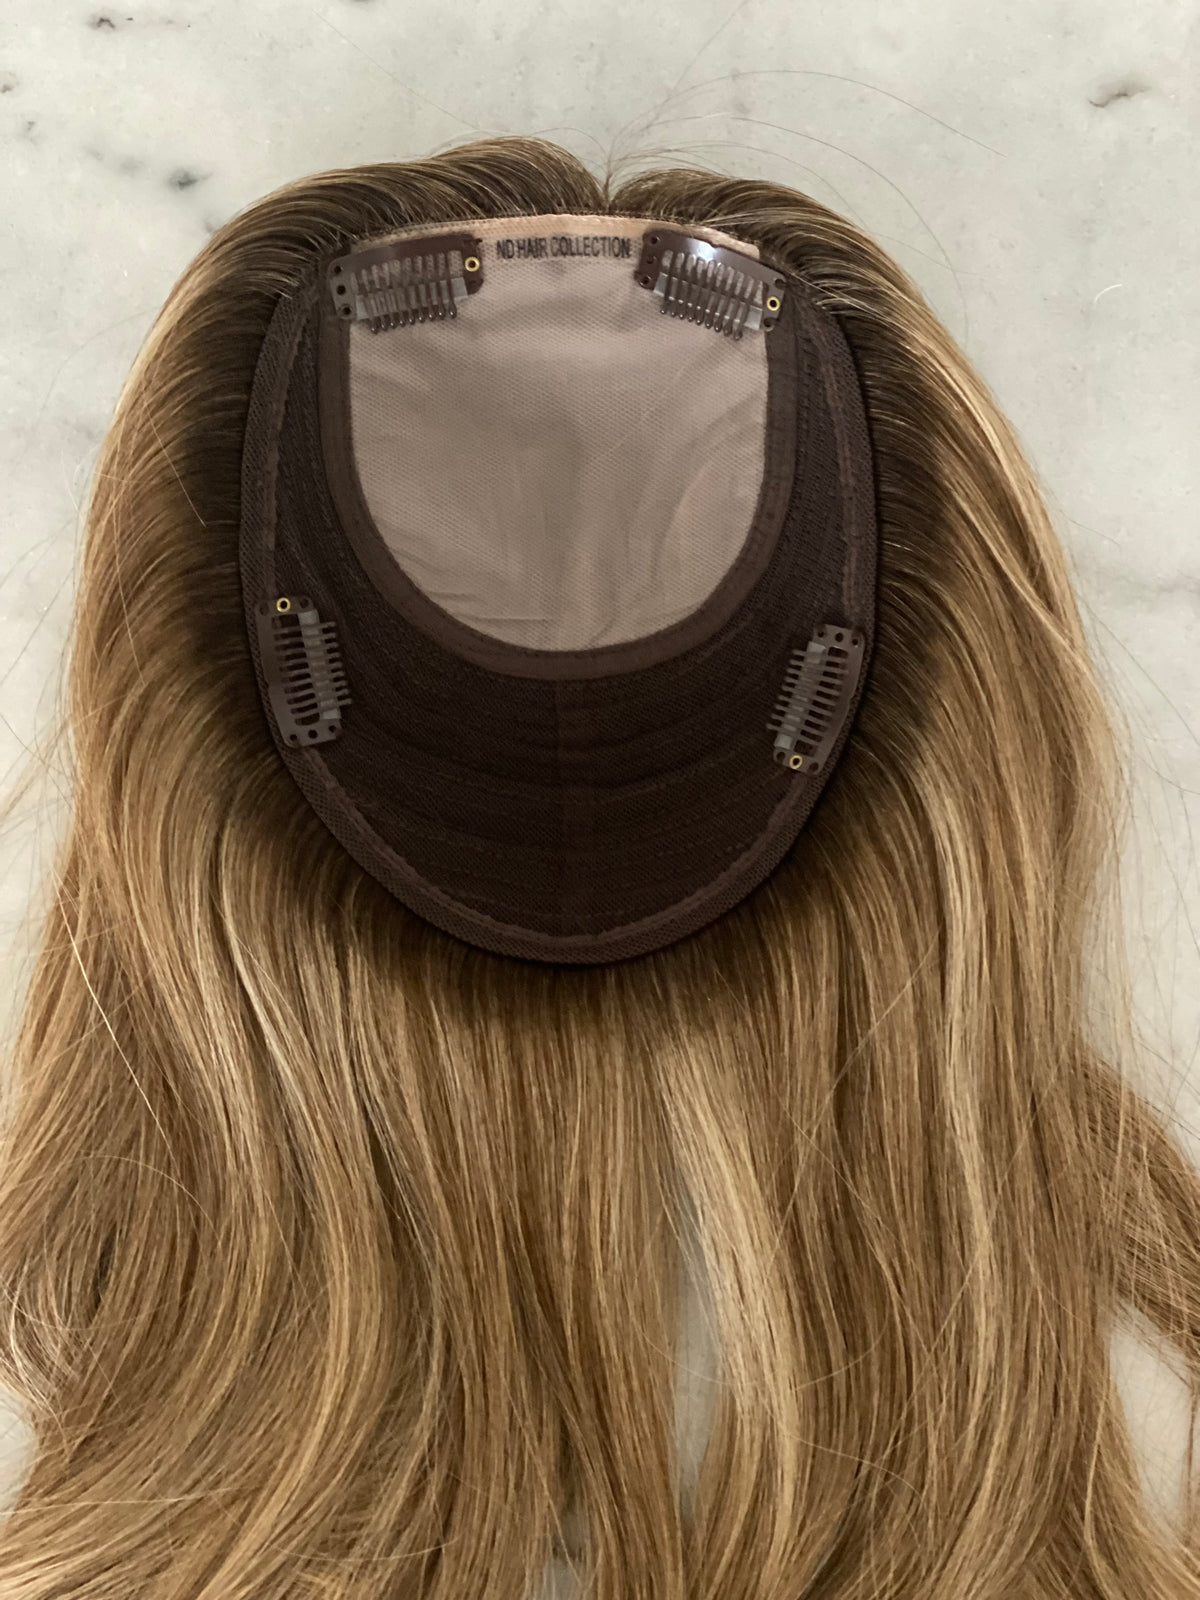 PALTROW - Cool/Ash Blonde with dark blonde roots - Hair Topper (5x7 cap)